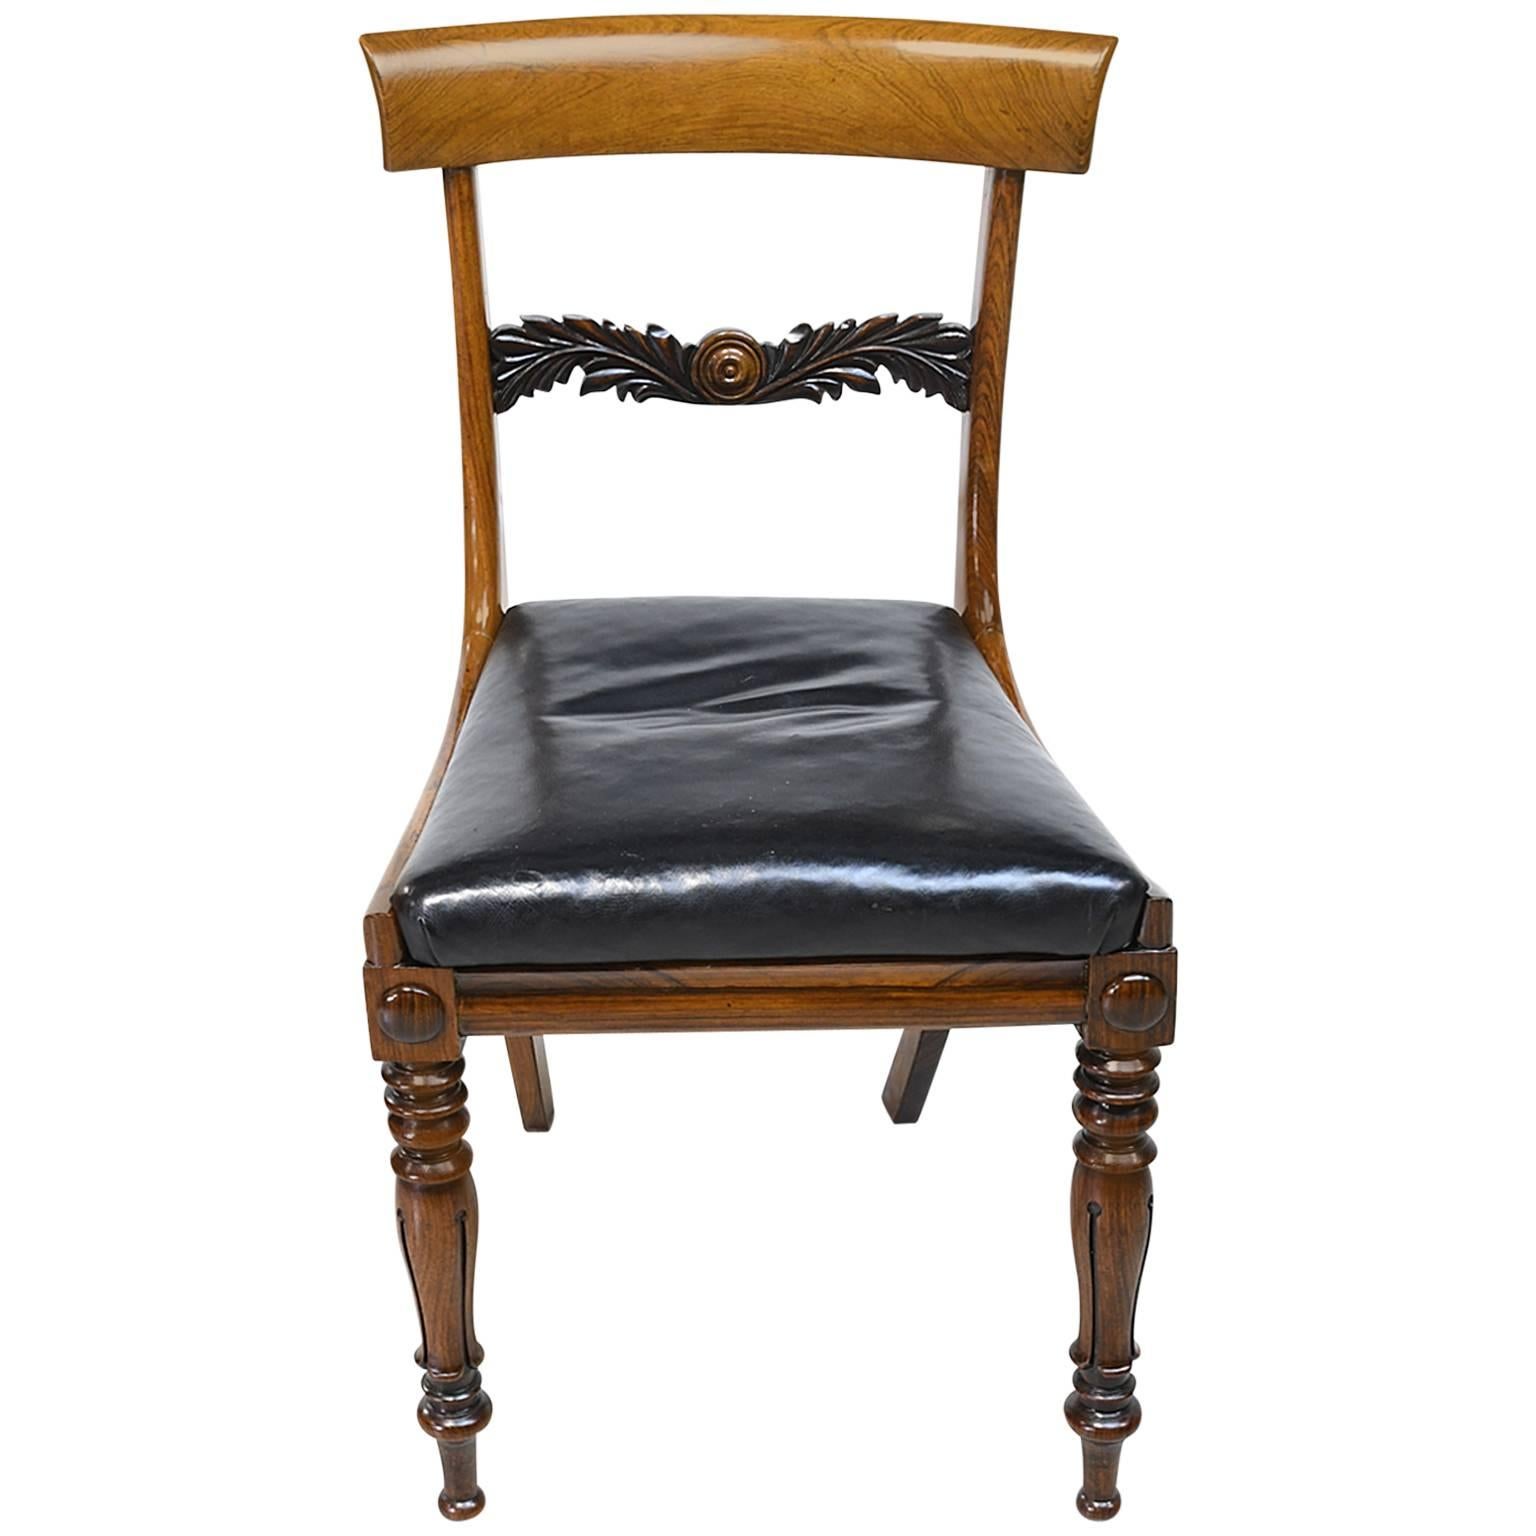 English Regency Rosewood Chair with Black Leather Upholstery, circa 1830